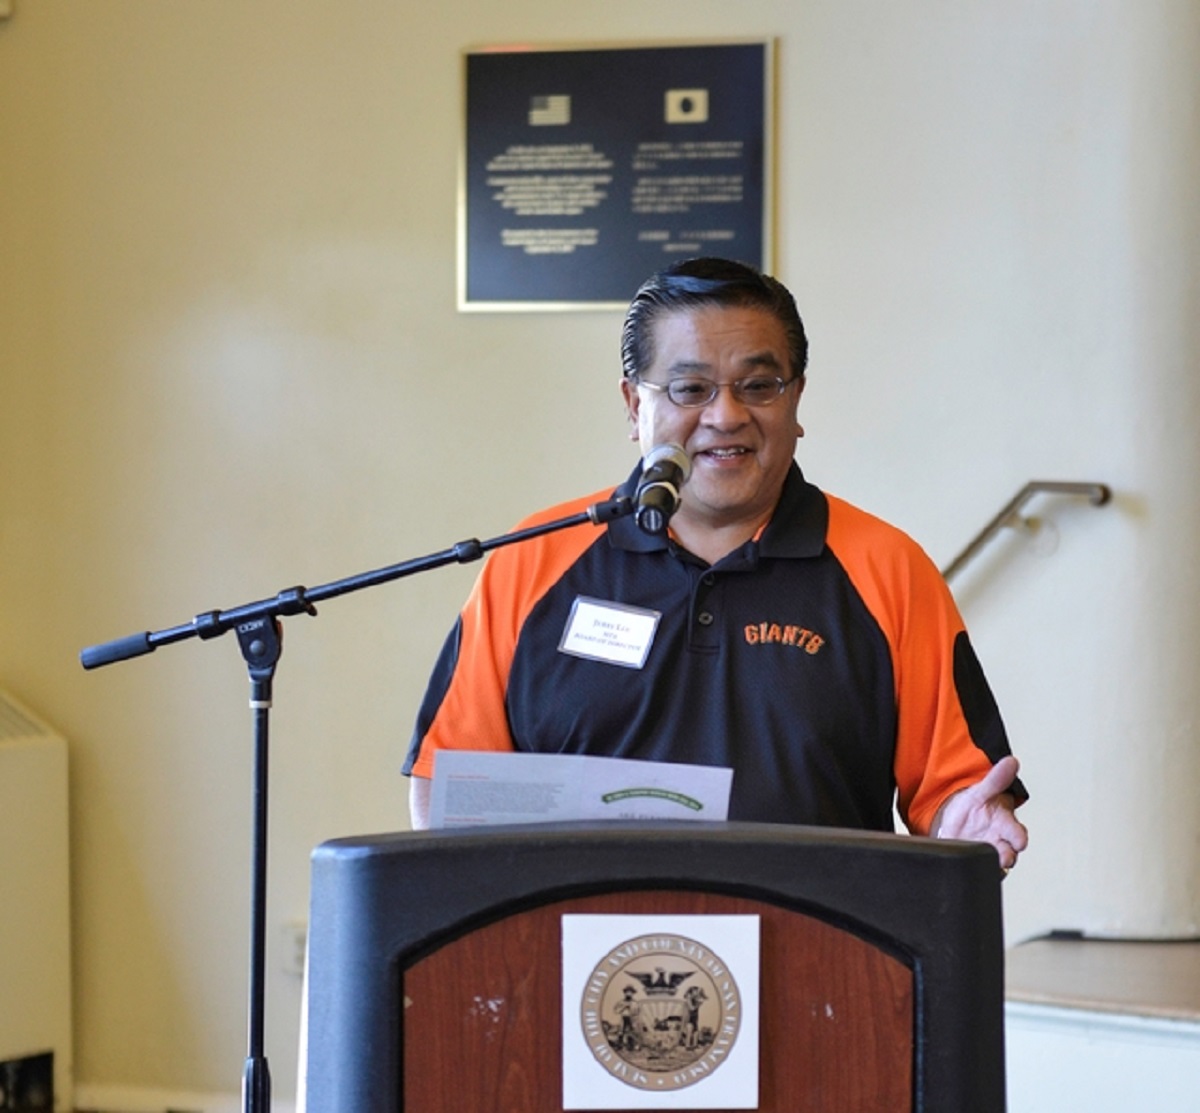 Director Jerry Lee, wearing an SF Giants polo shirt, speaks at a lecturn to attendess of the 2014 Safe Drivers Awards